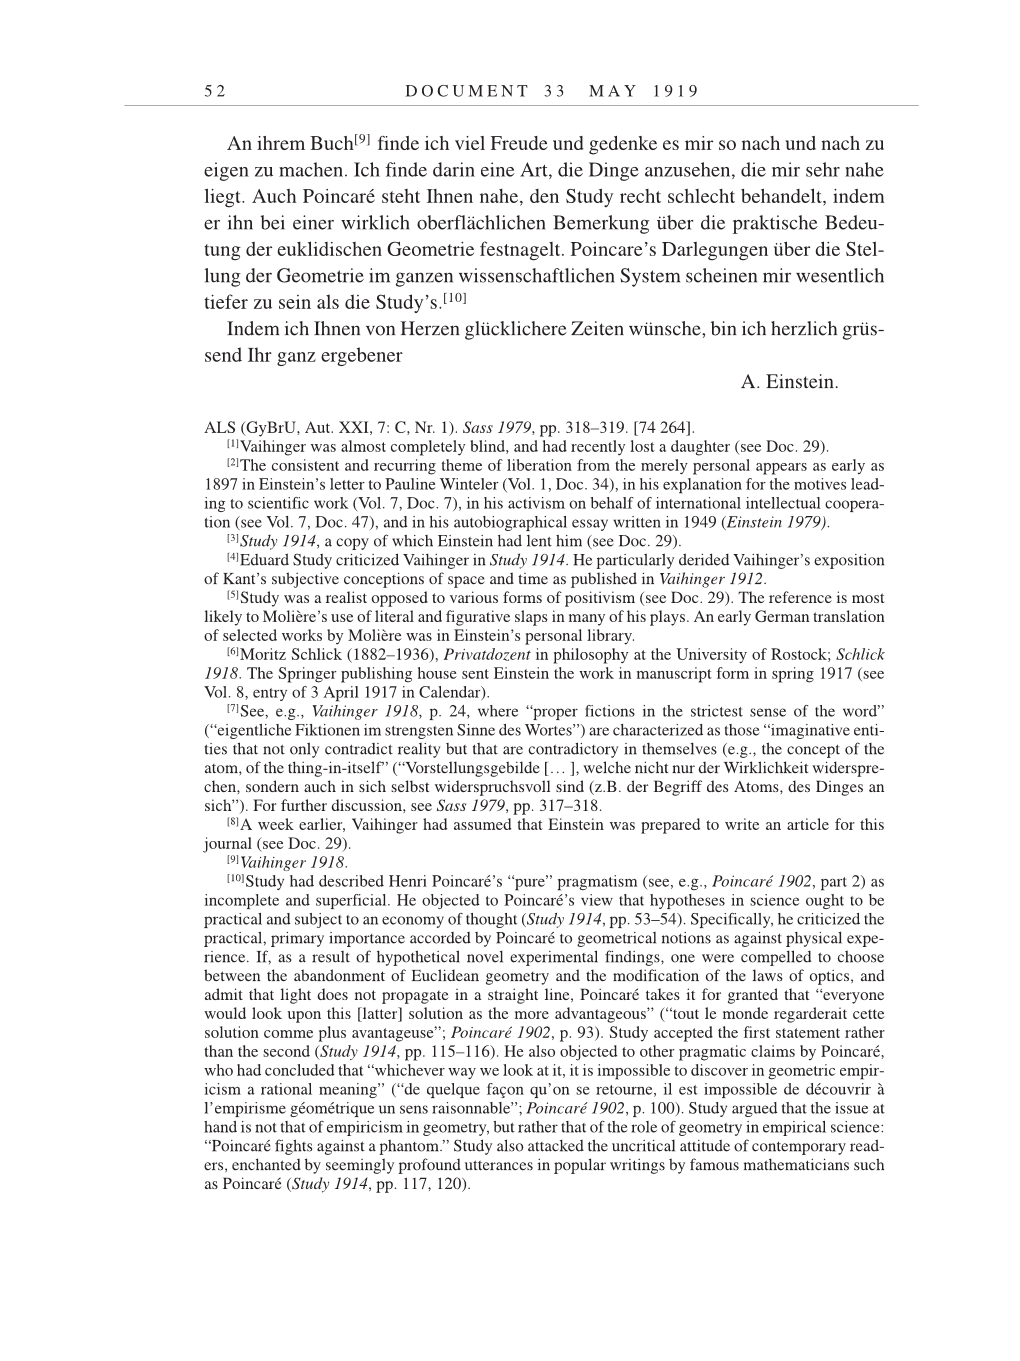 Volume 9: The Berlin Years: Correspondence January 1919-April 1920 page 52